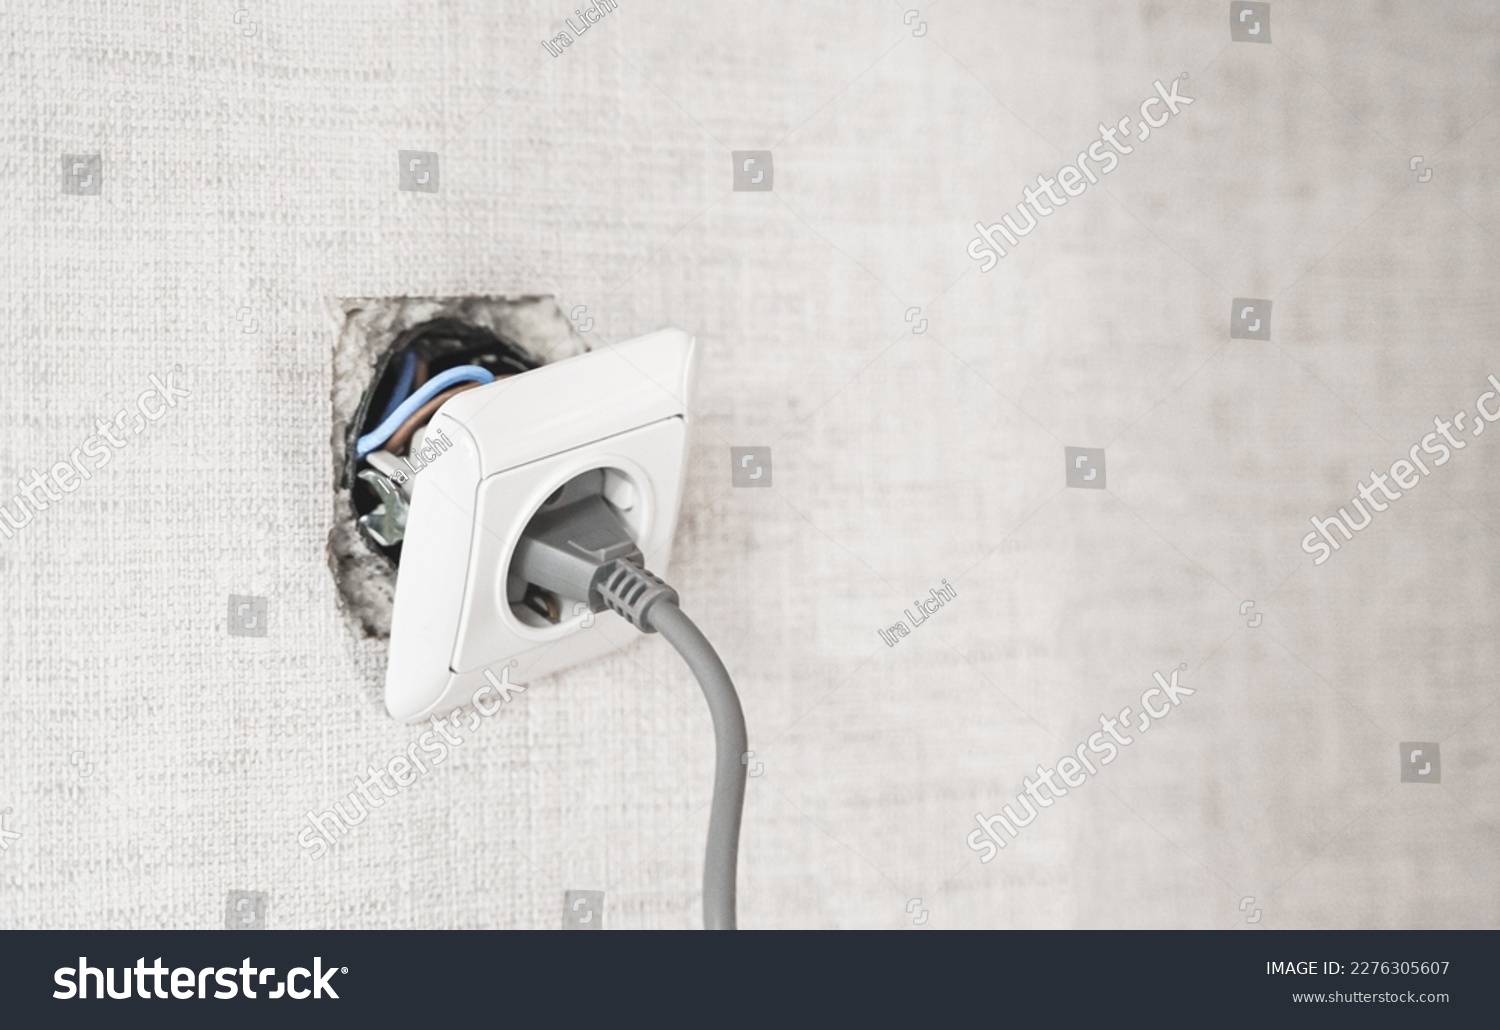 Dangerous bad,broken socket,plug in bathroom,falling out of wall. Outlet installation in old apartment. Poor electrical wire,repair.Terrible do-it-yourself repairmen.Short circuit risk,electric shock. #2276305607